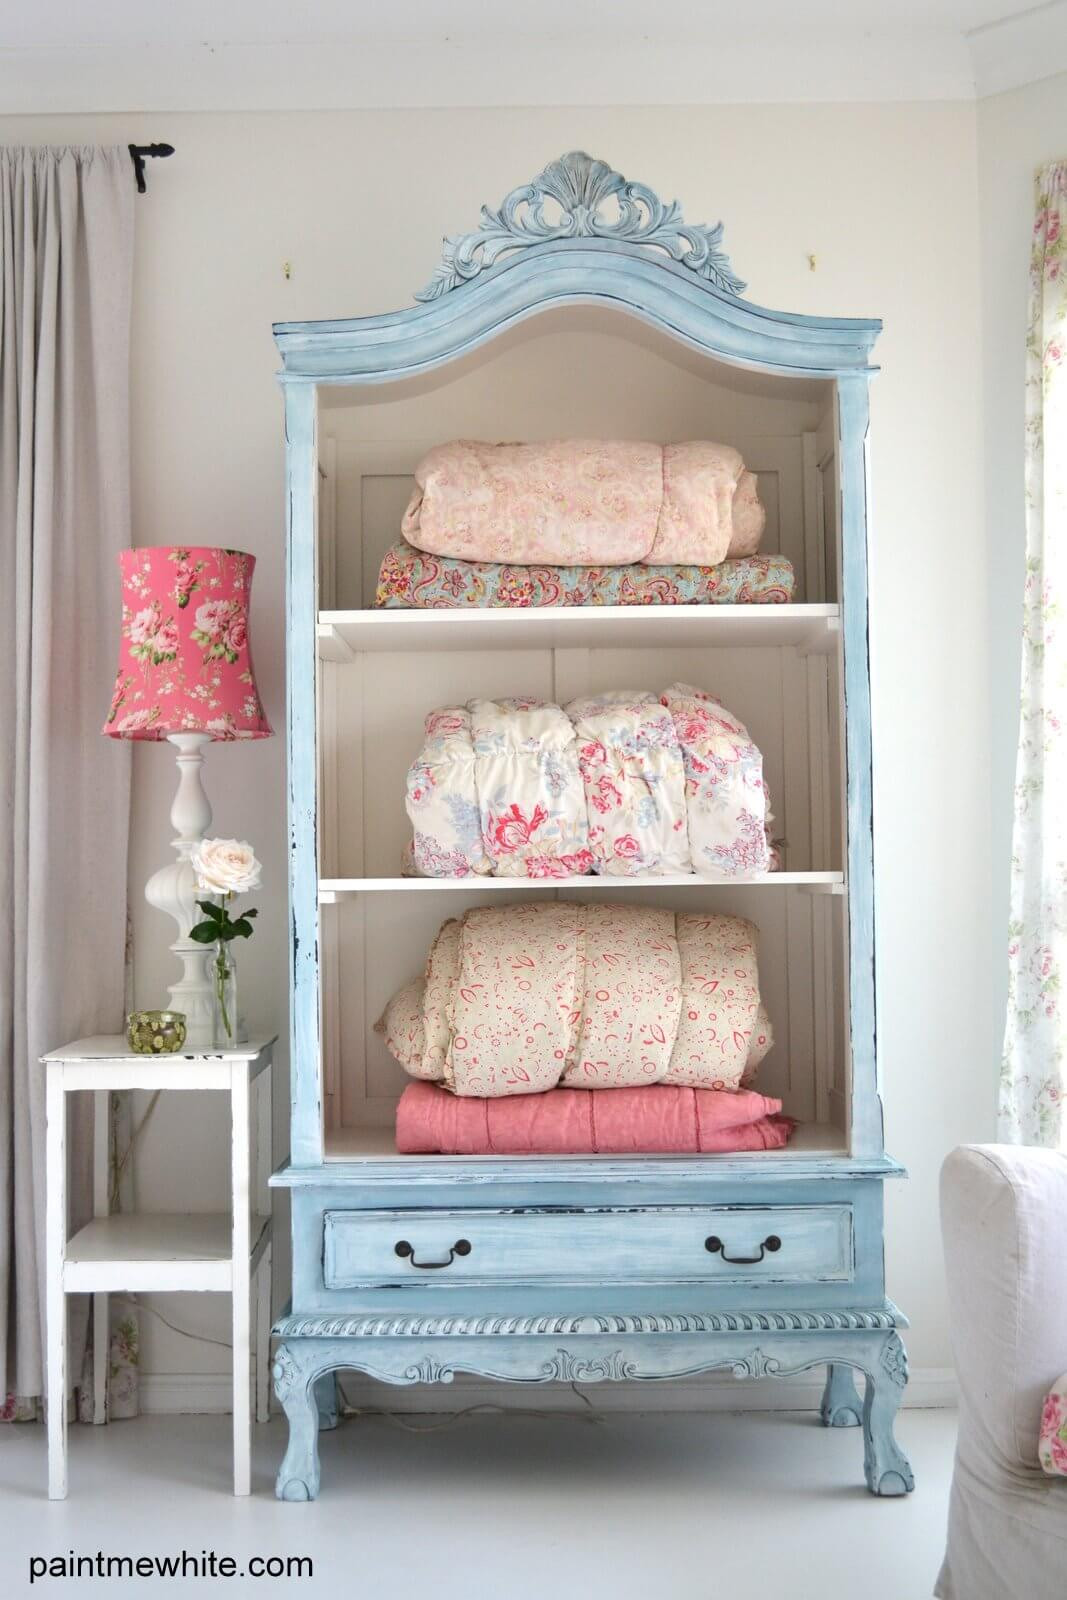 Shabby Chic Bedroom Furniture
 35 Best Shabby Chic Bedroom Design and Decor Ideas for 2017